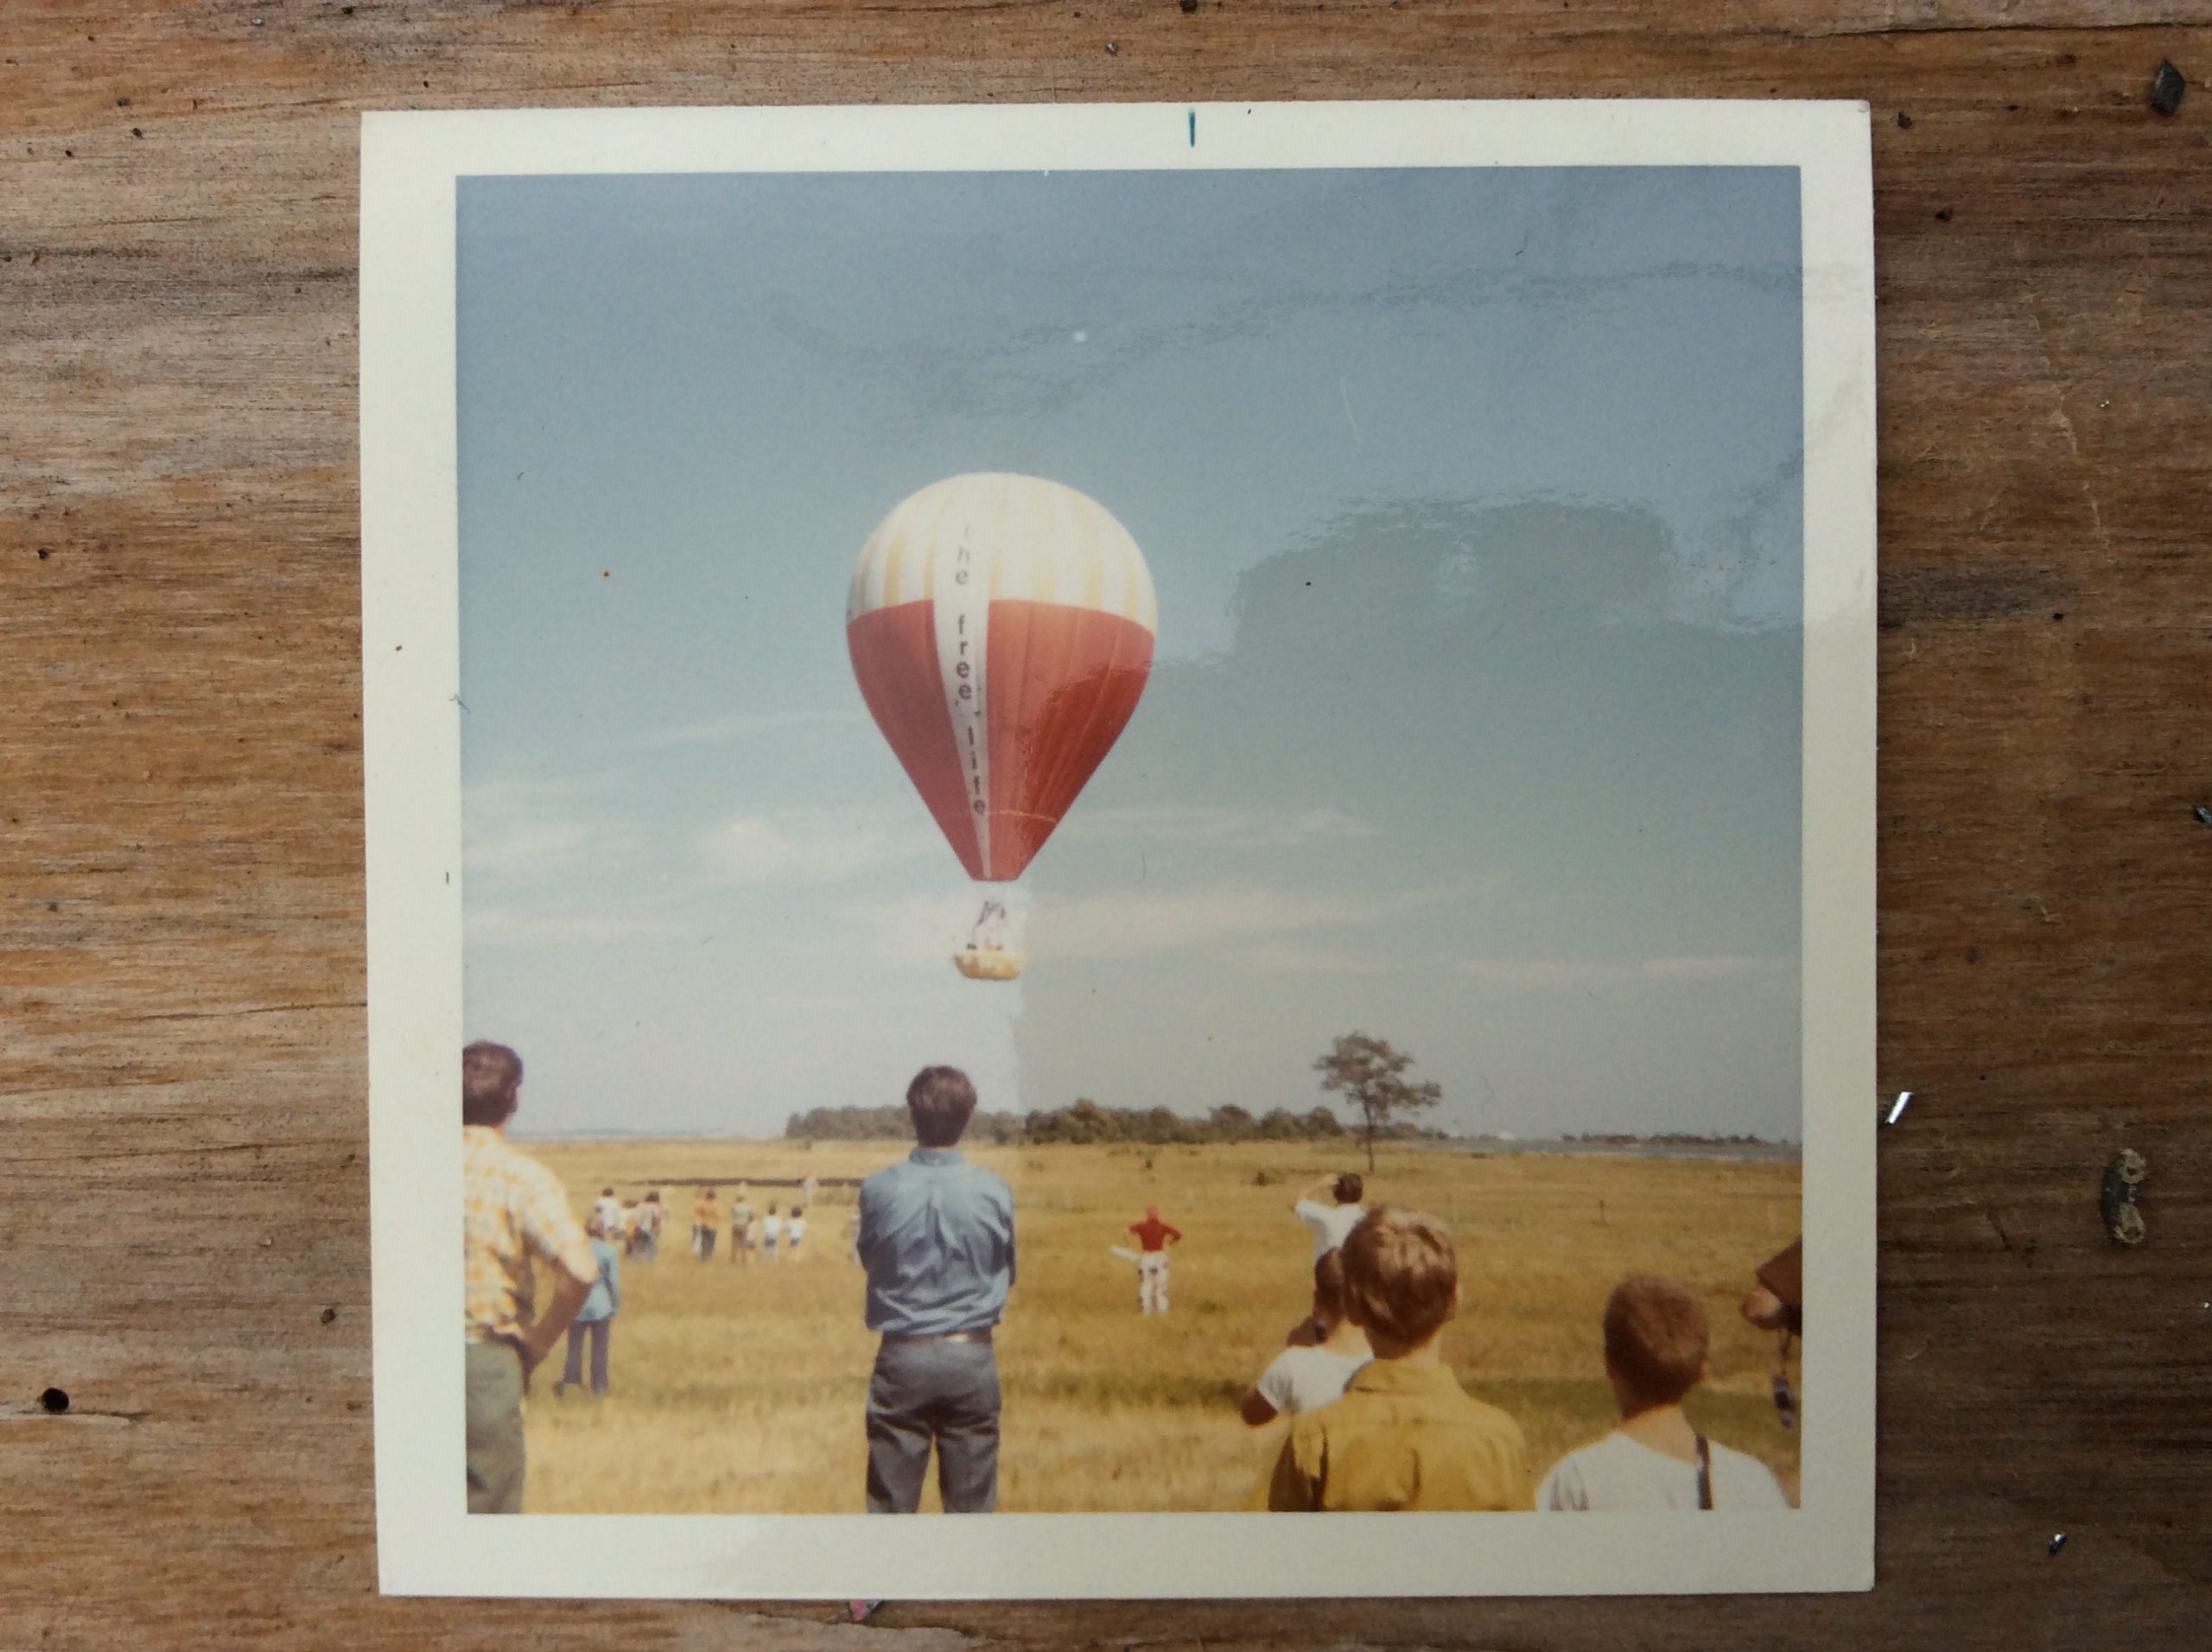 The Free Life takes off from a field in Springs, September 20, 1970.